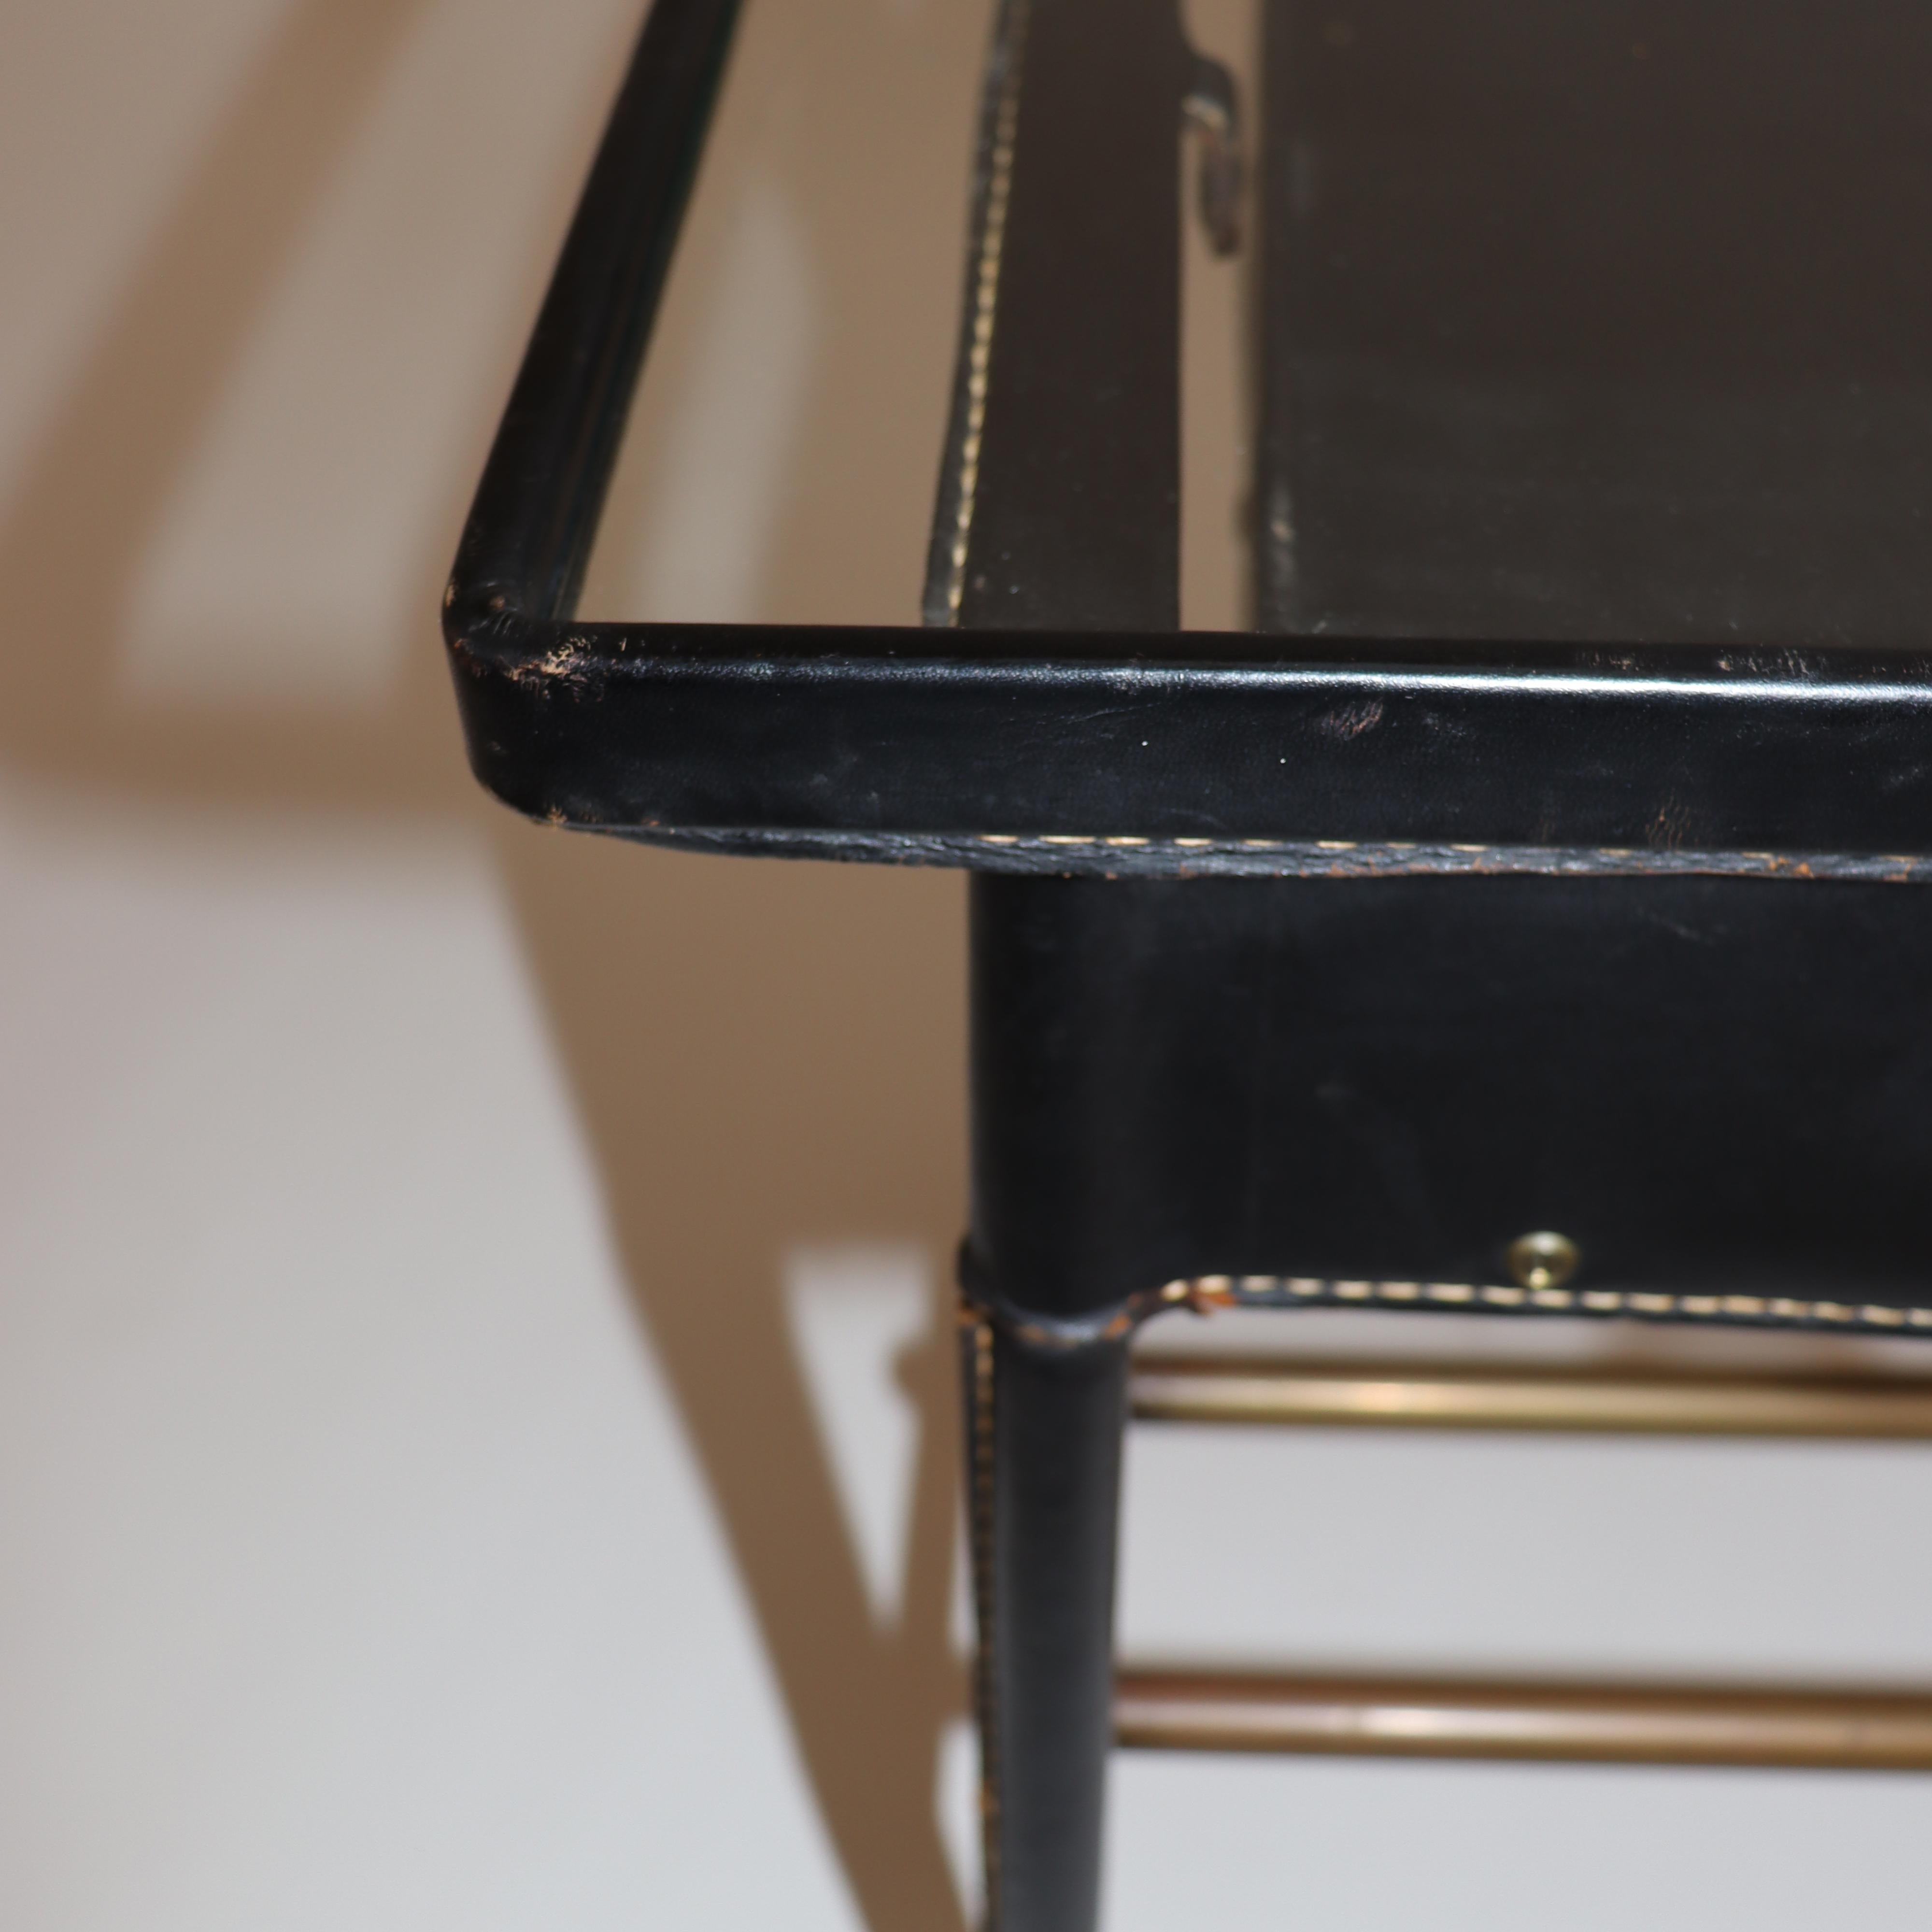 Mid-20th Century Jacques Adnet Hand-Stitched Black Leather Night Stand, 1950's France For Sale